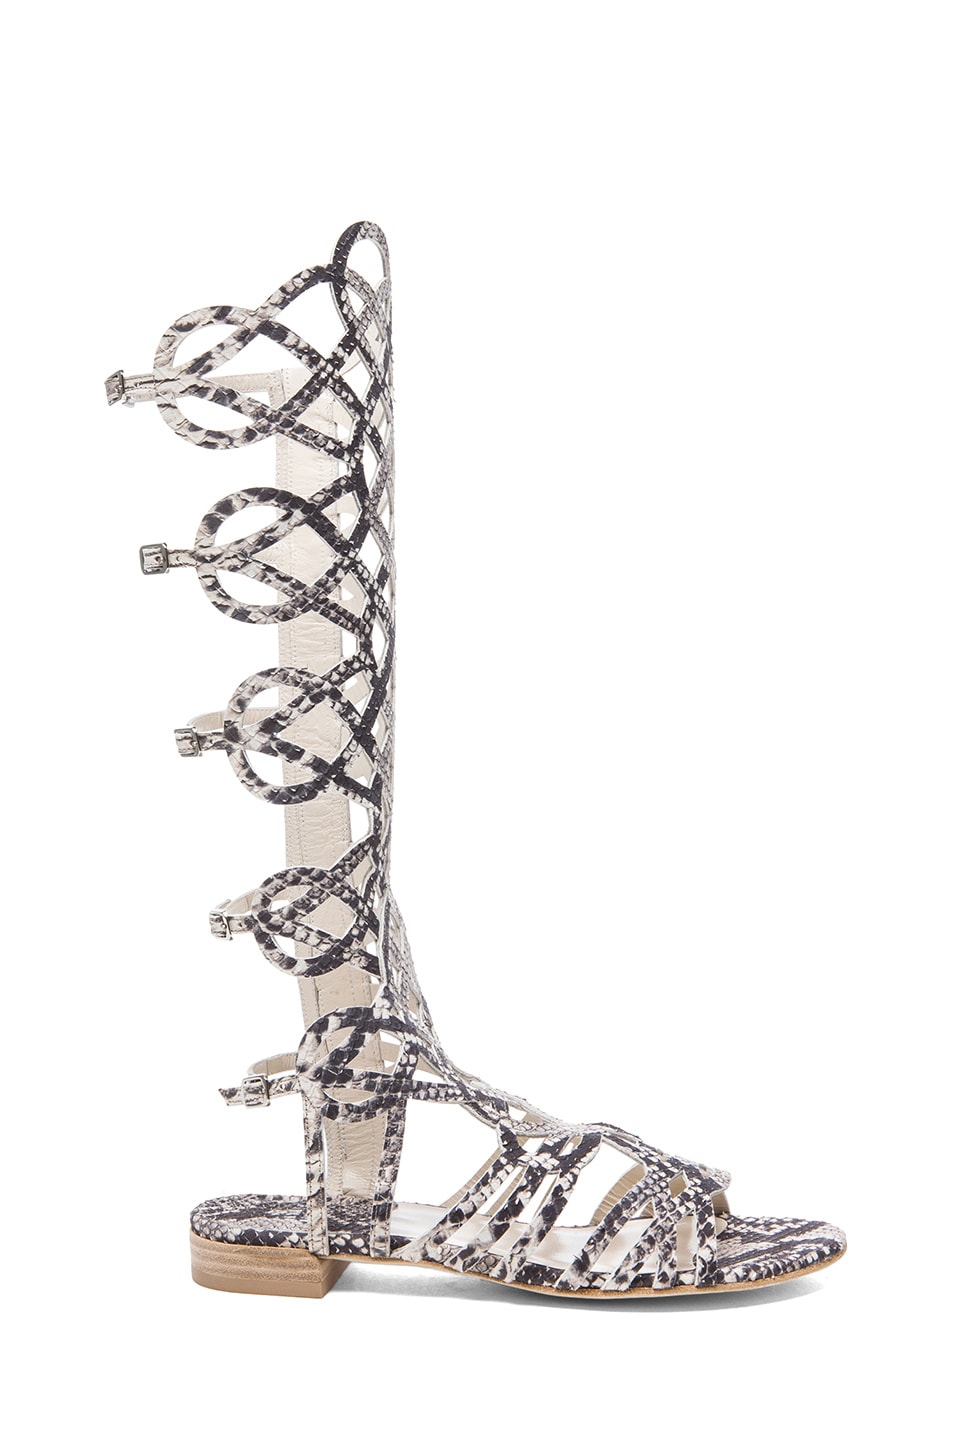 Stuart Weitzman Aphrodite Embossed Leather Sandals in Natural Snake | FWRD